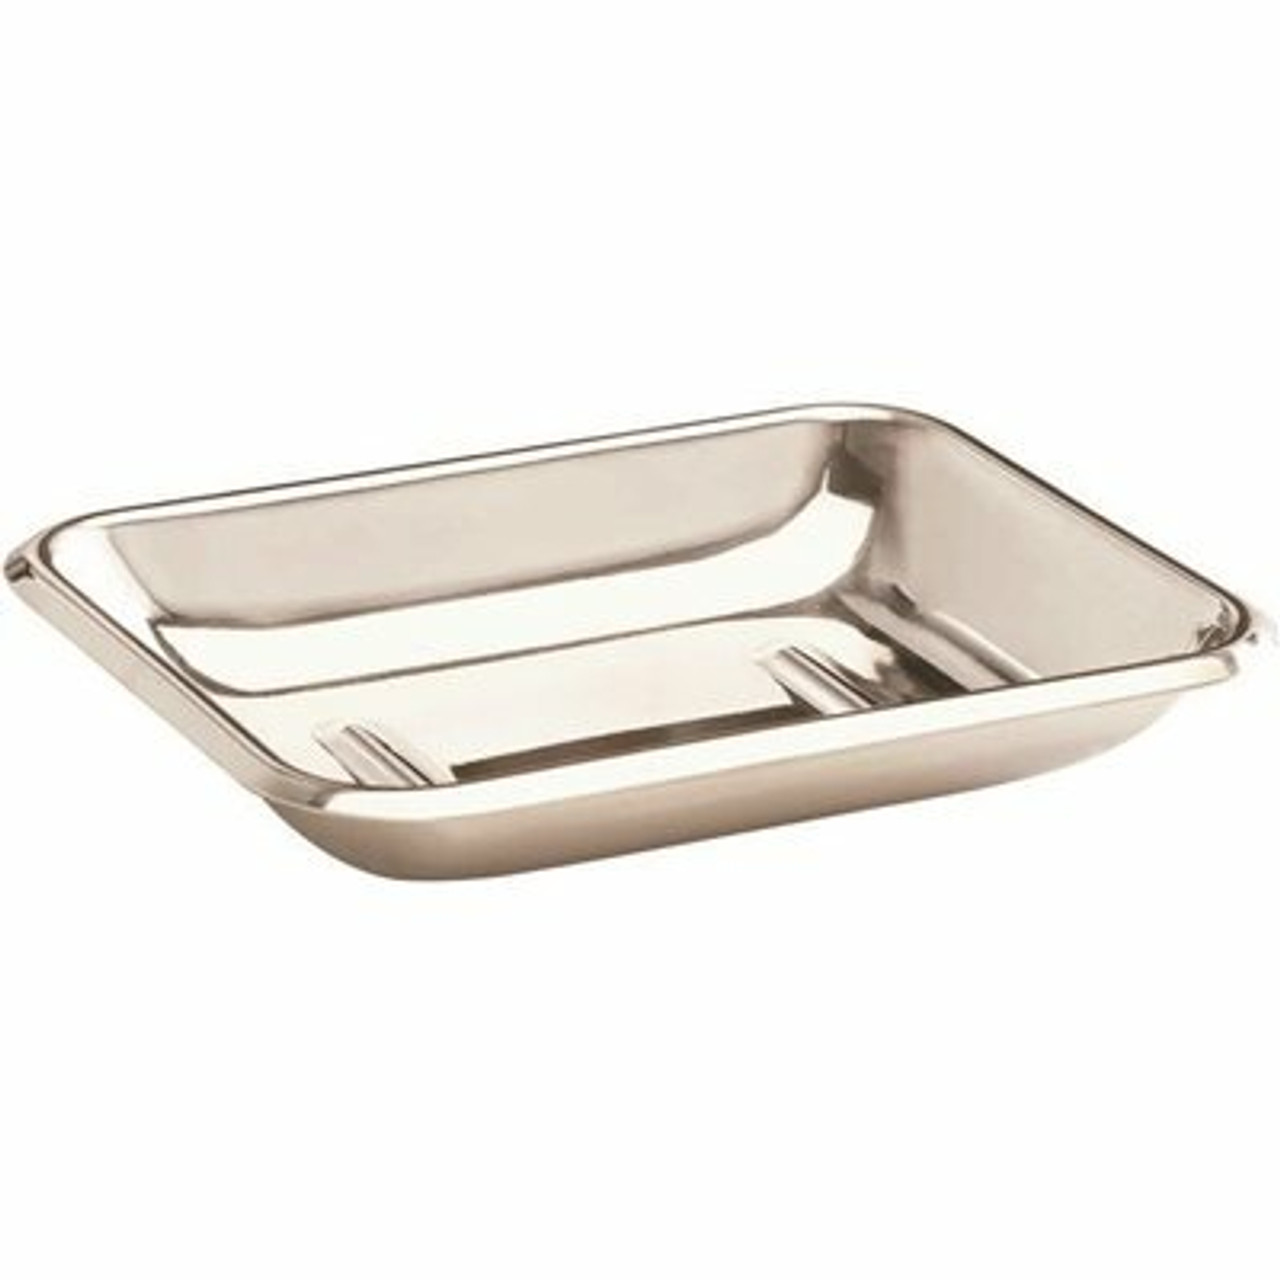 Stainless Steel Basic Soap Dish